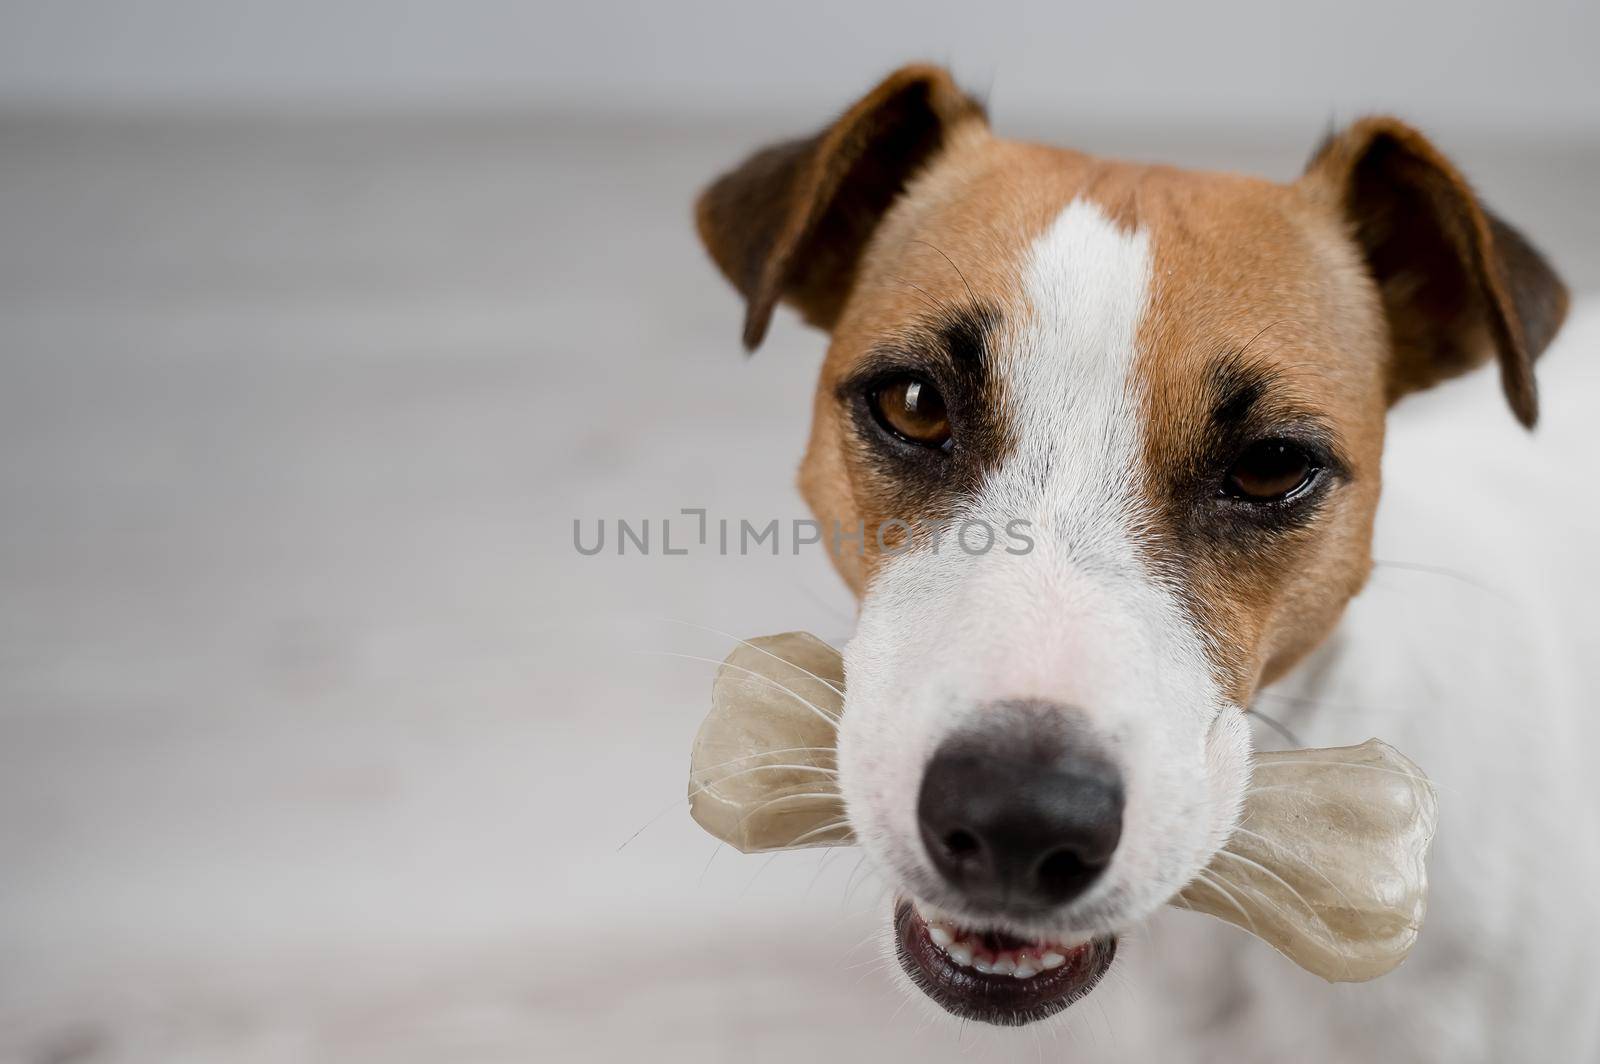 The dog holds a bone in its mouth. Jack russell terrier eating rawhide treat. by mrwed54